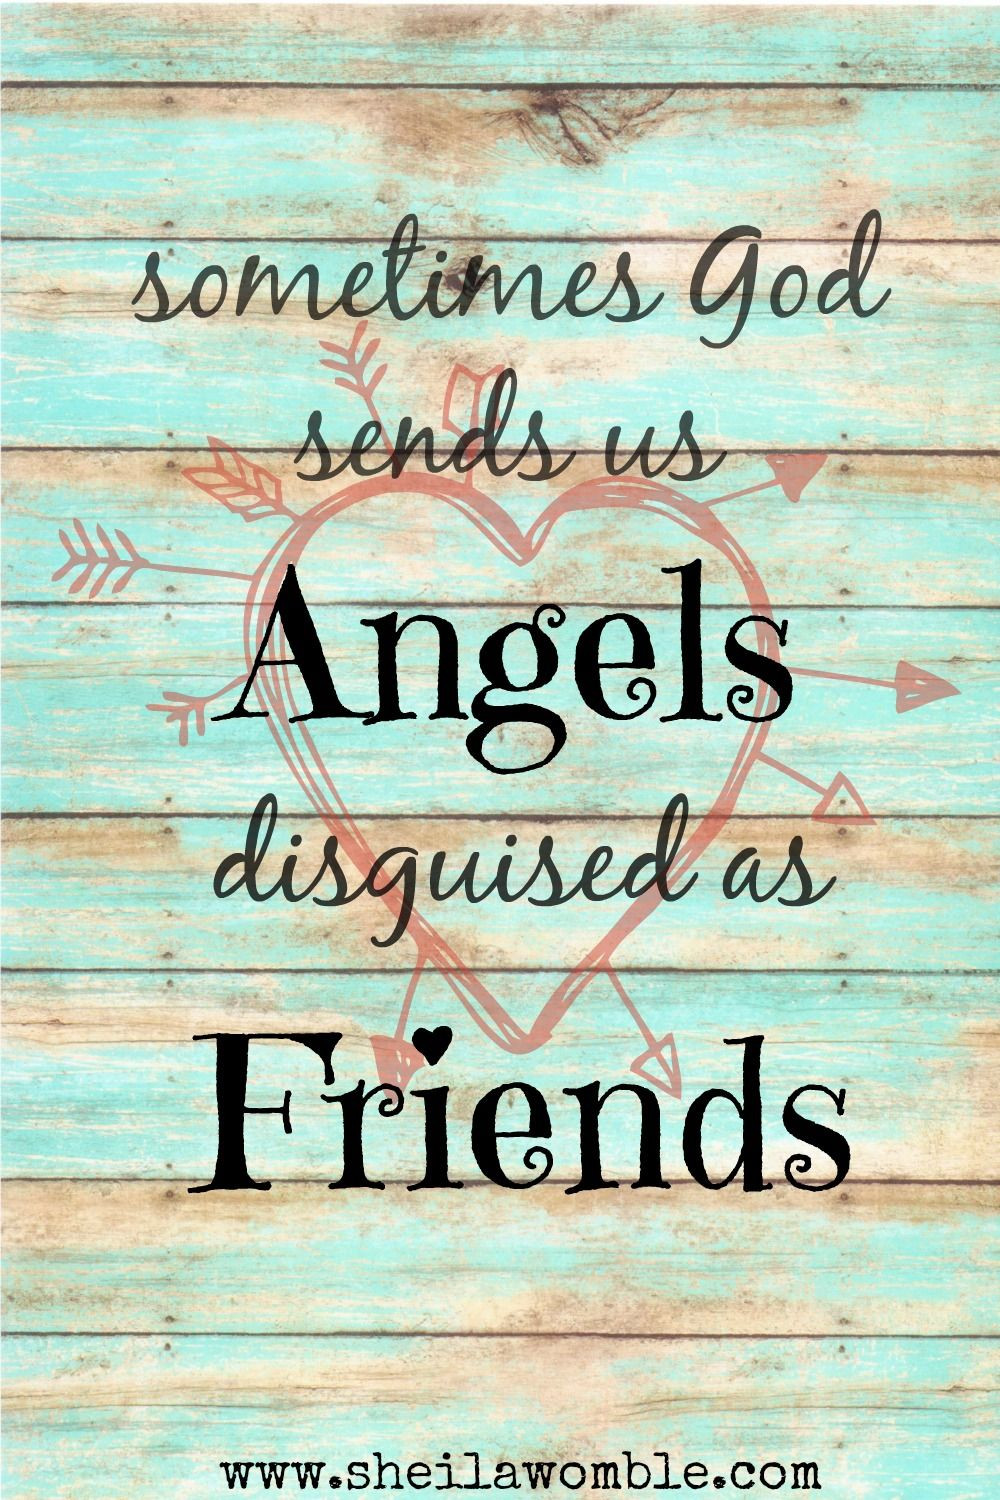 Religious Friendship Quotes
 All women need a God sent Friend who shines Jesus